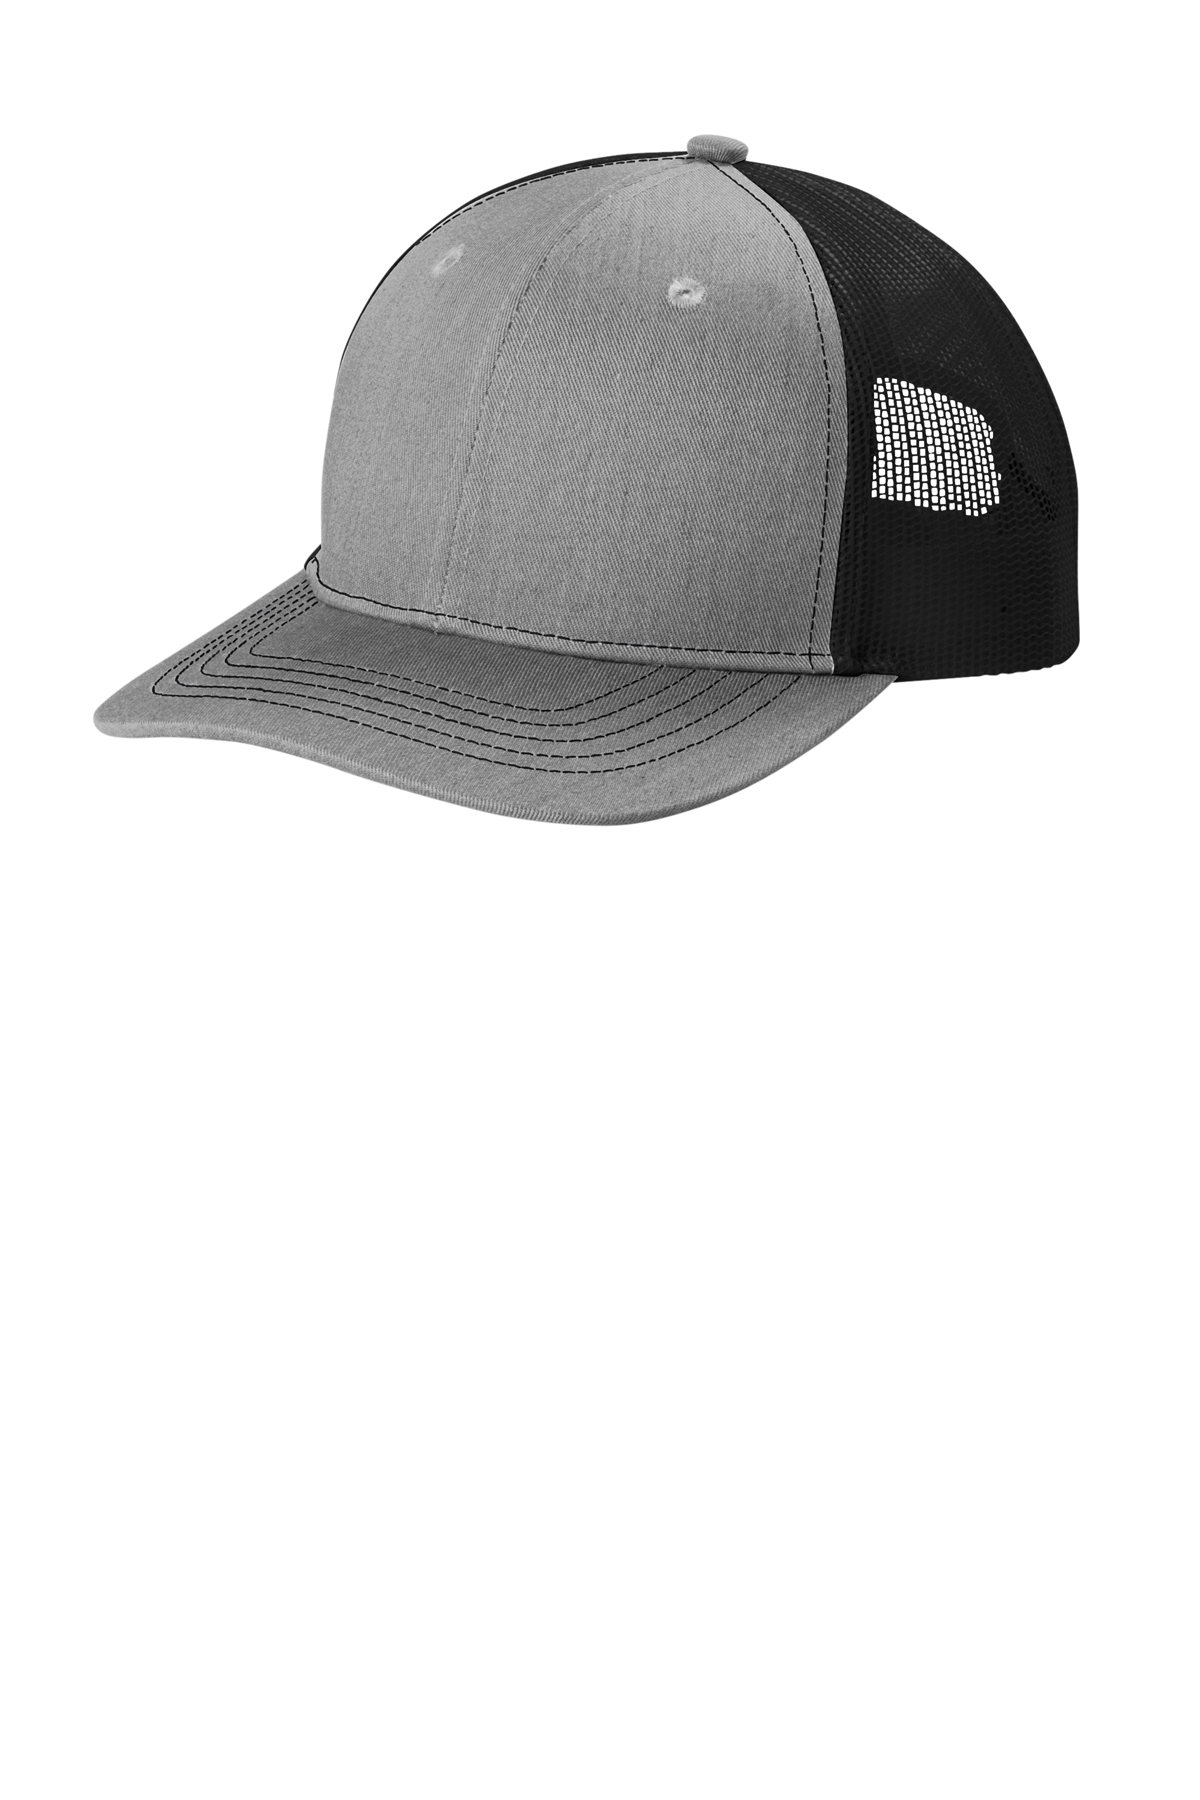 click to view Heather Grey/ Black